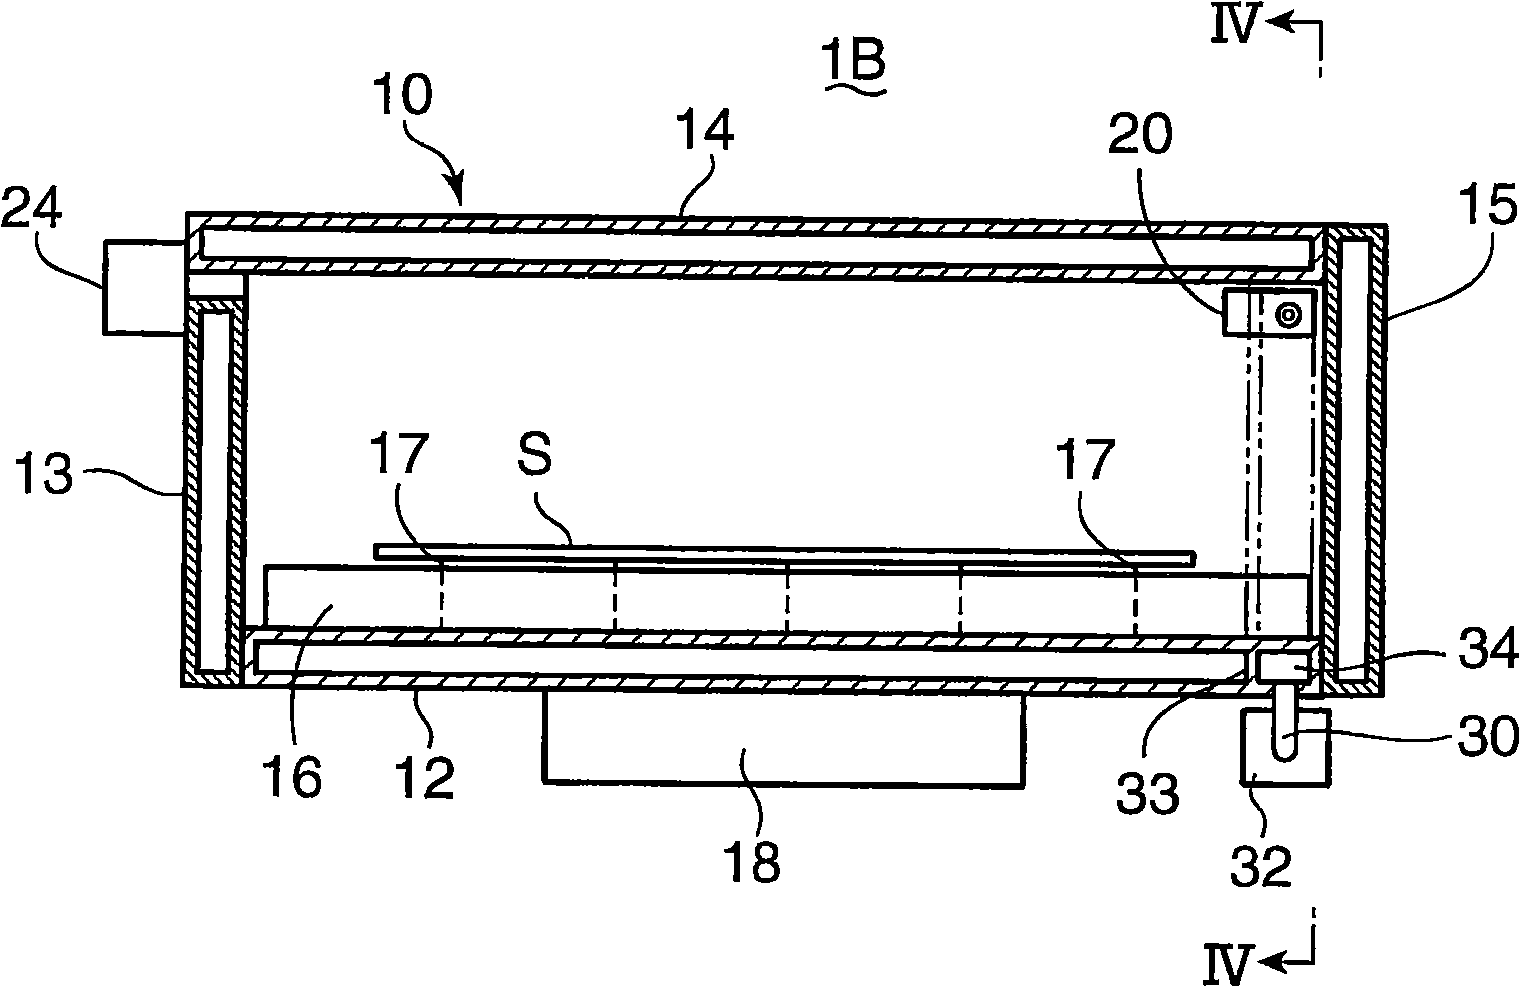 Substrate hot processing apparatus and nozzle member